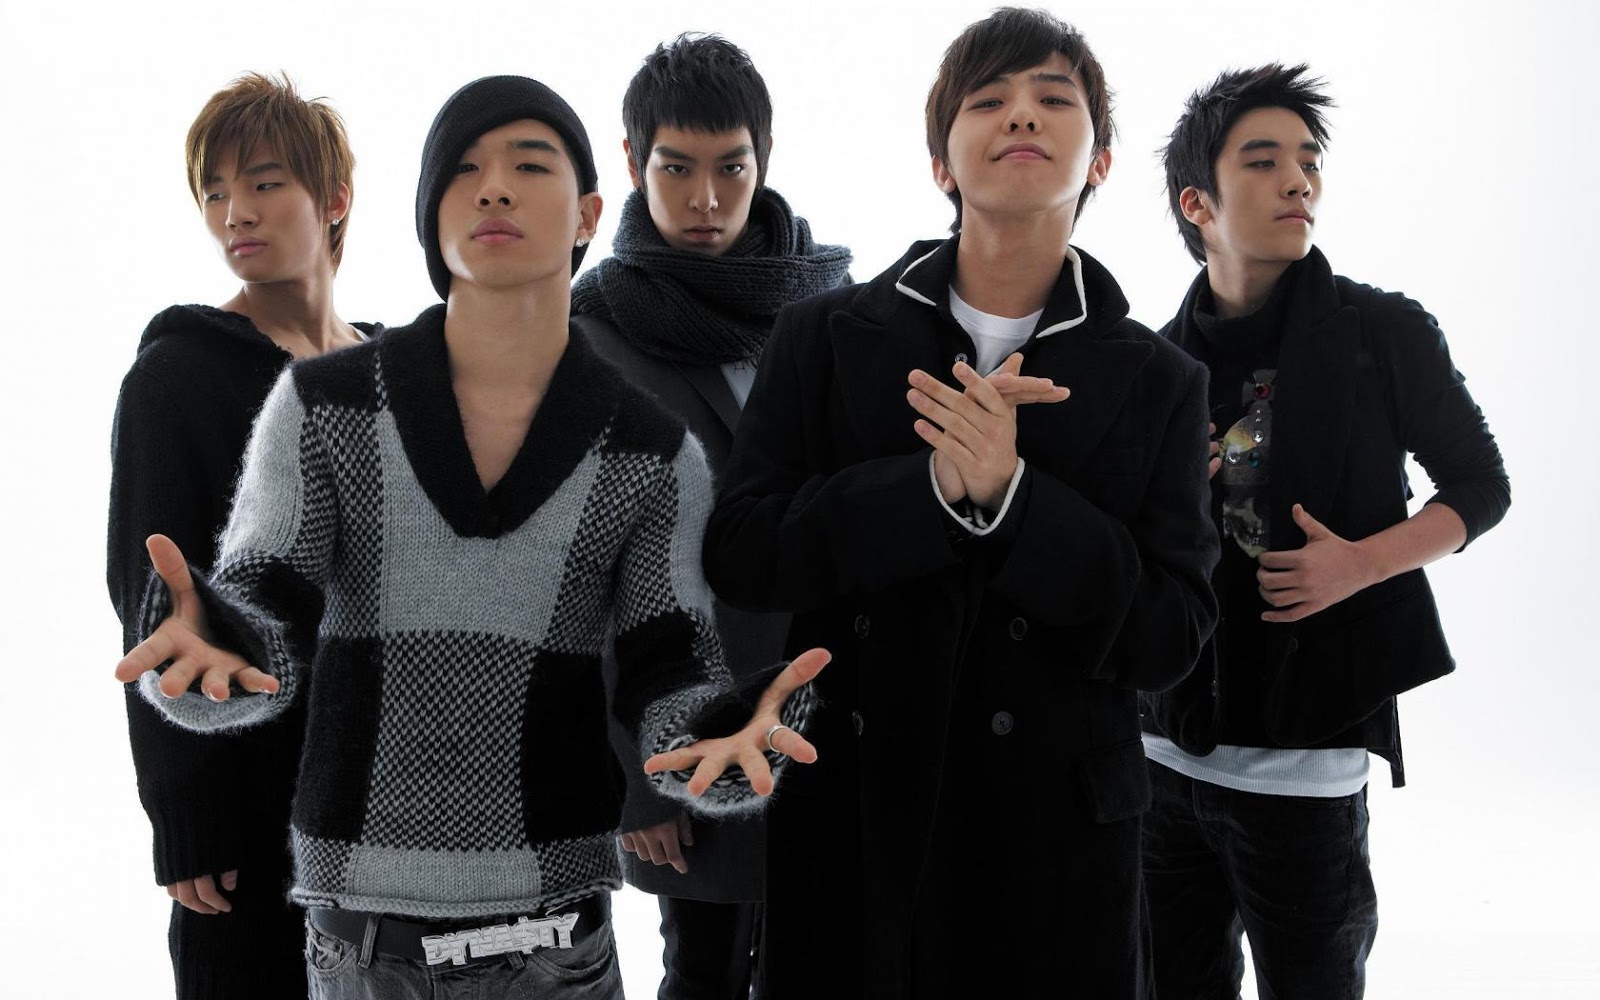 South Korean Boys Are HD Desktop Wallpaper And Best Background For